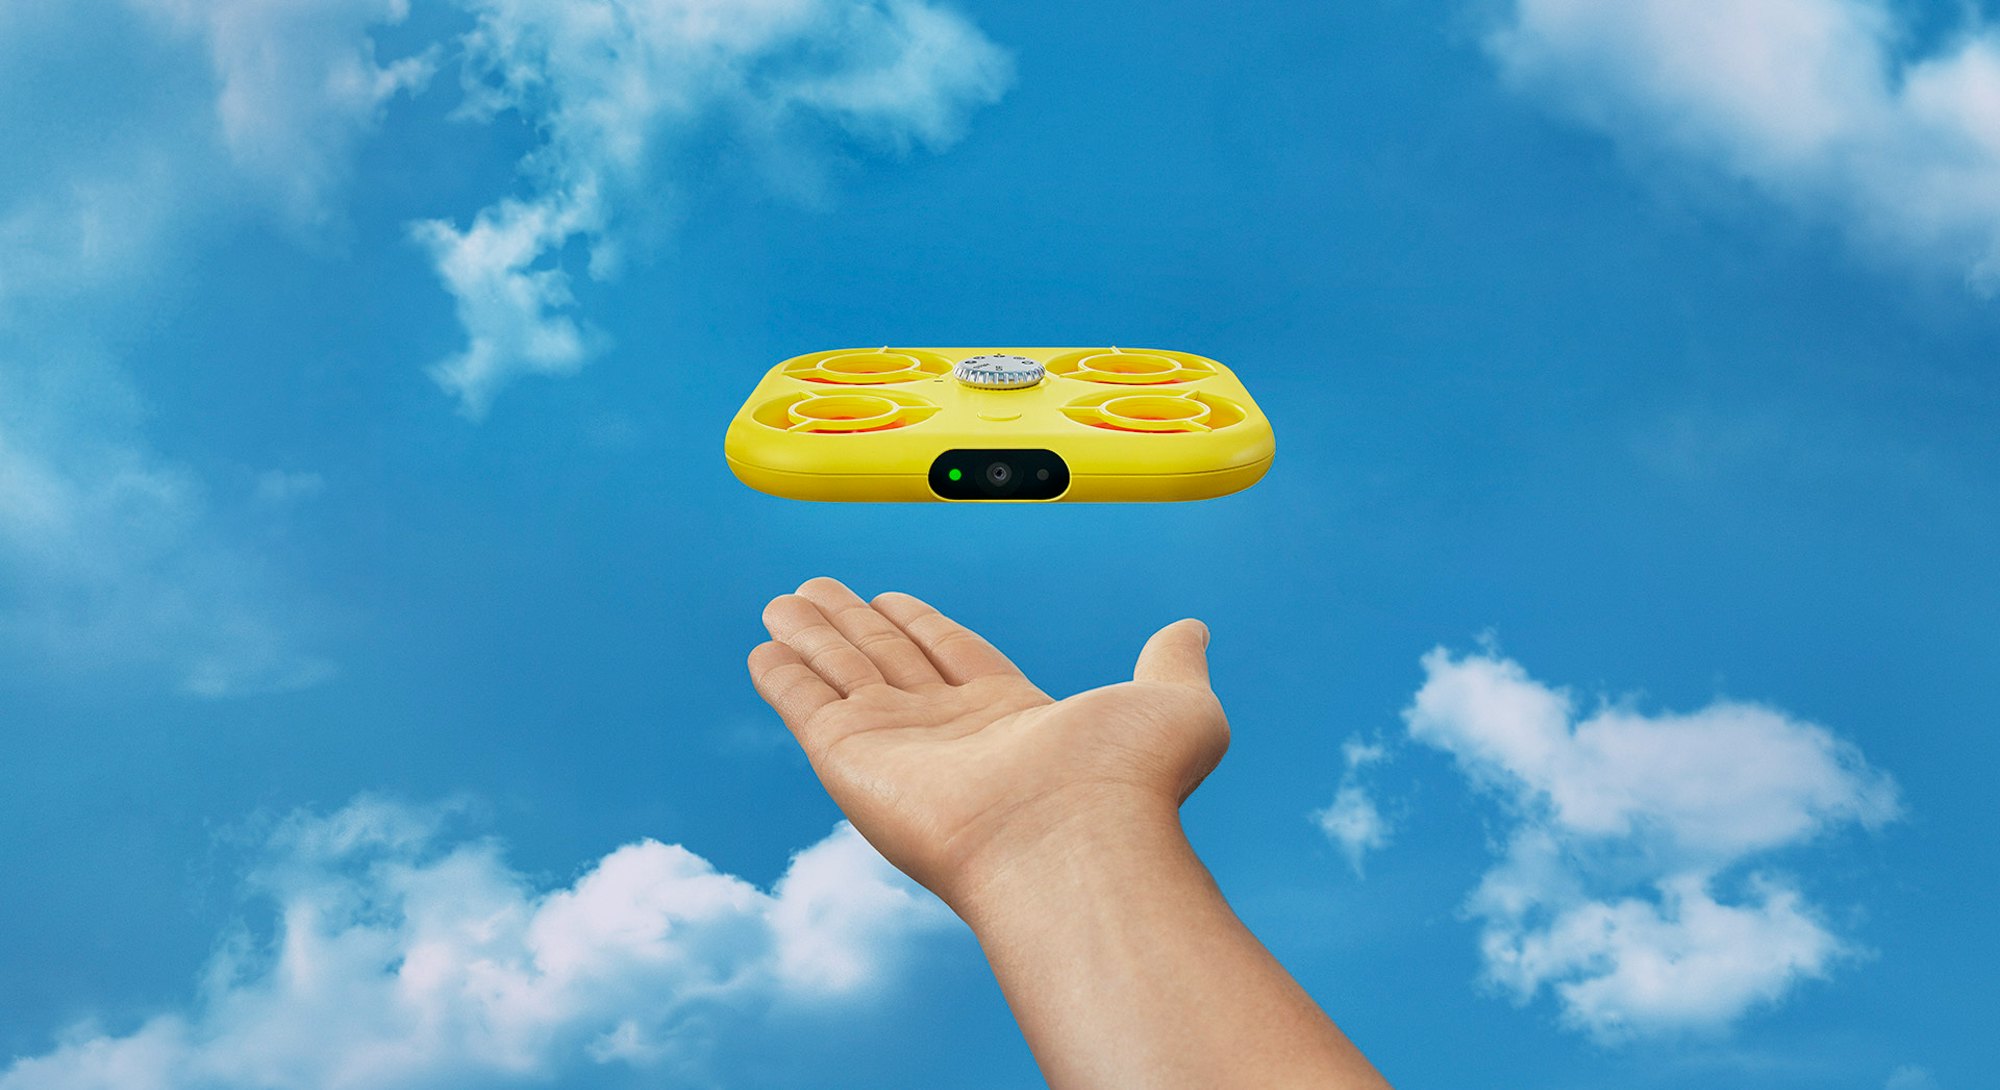 An honest review of Pixy, Snap's new drone camera